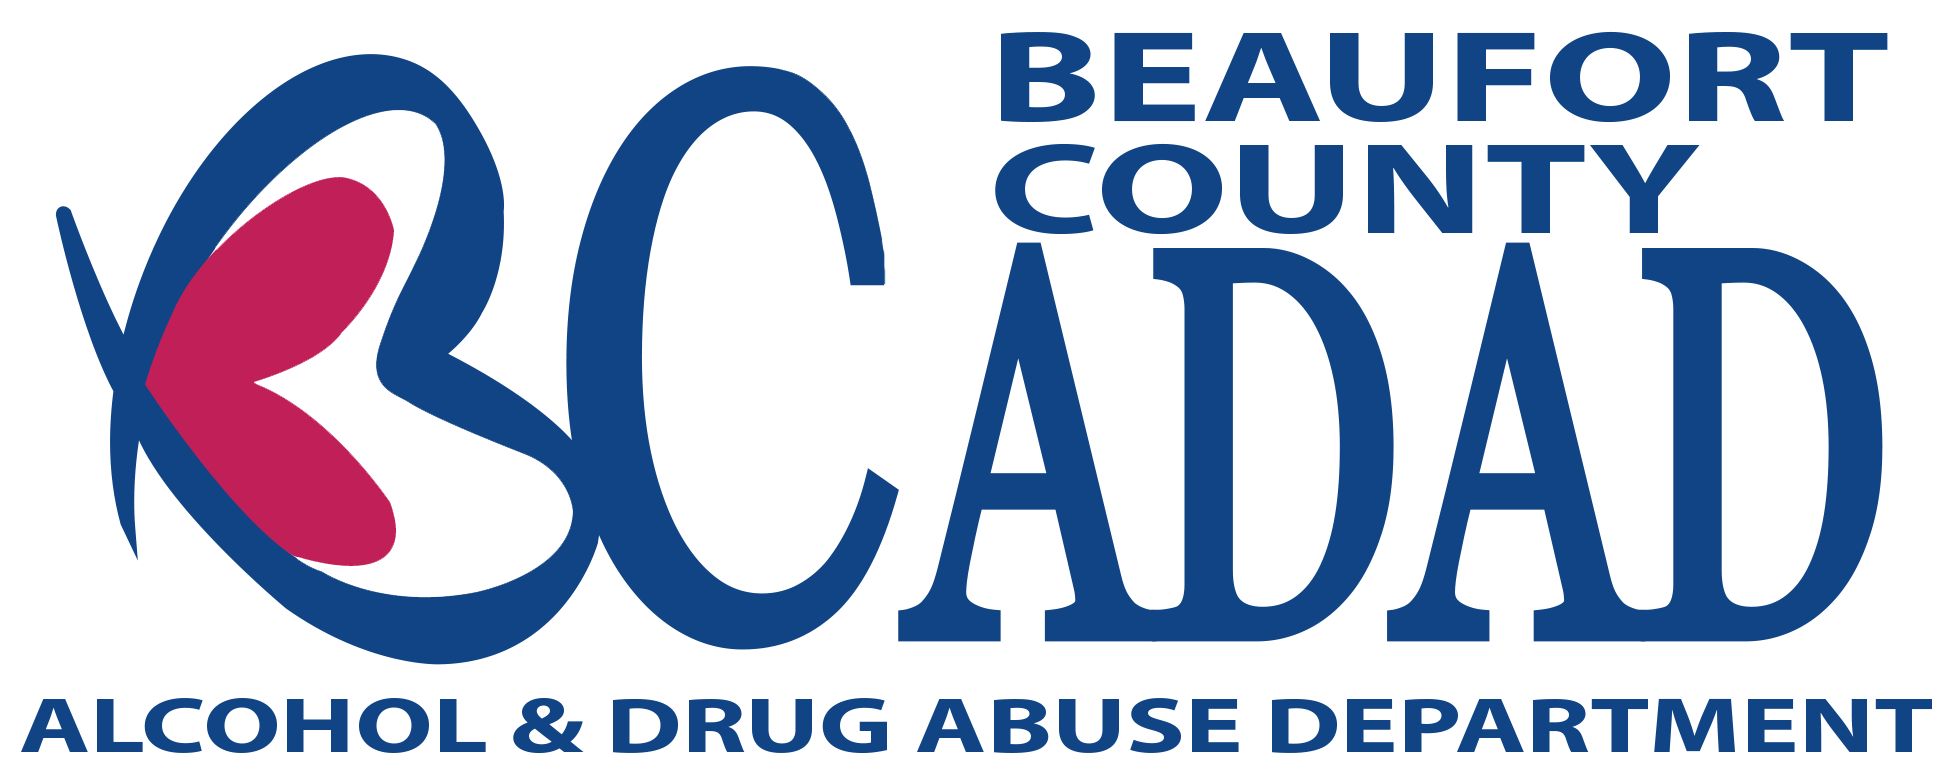 Beaufort County Offers Two Locations for Residents to Properly Dispose of Prescription Drugs Saturday, April 24